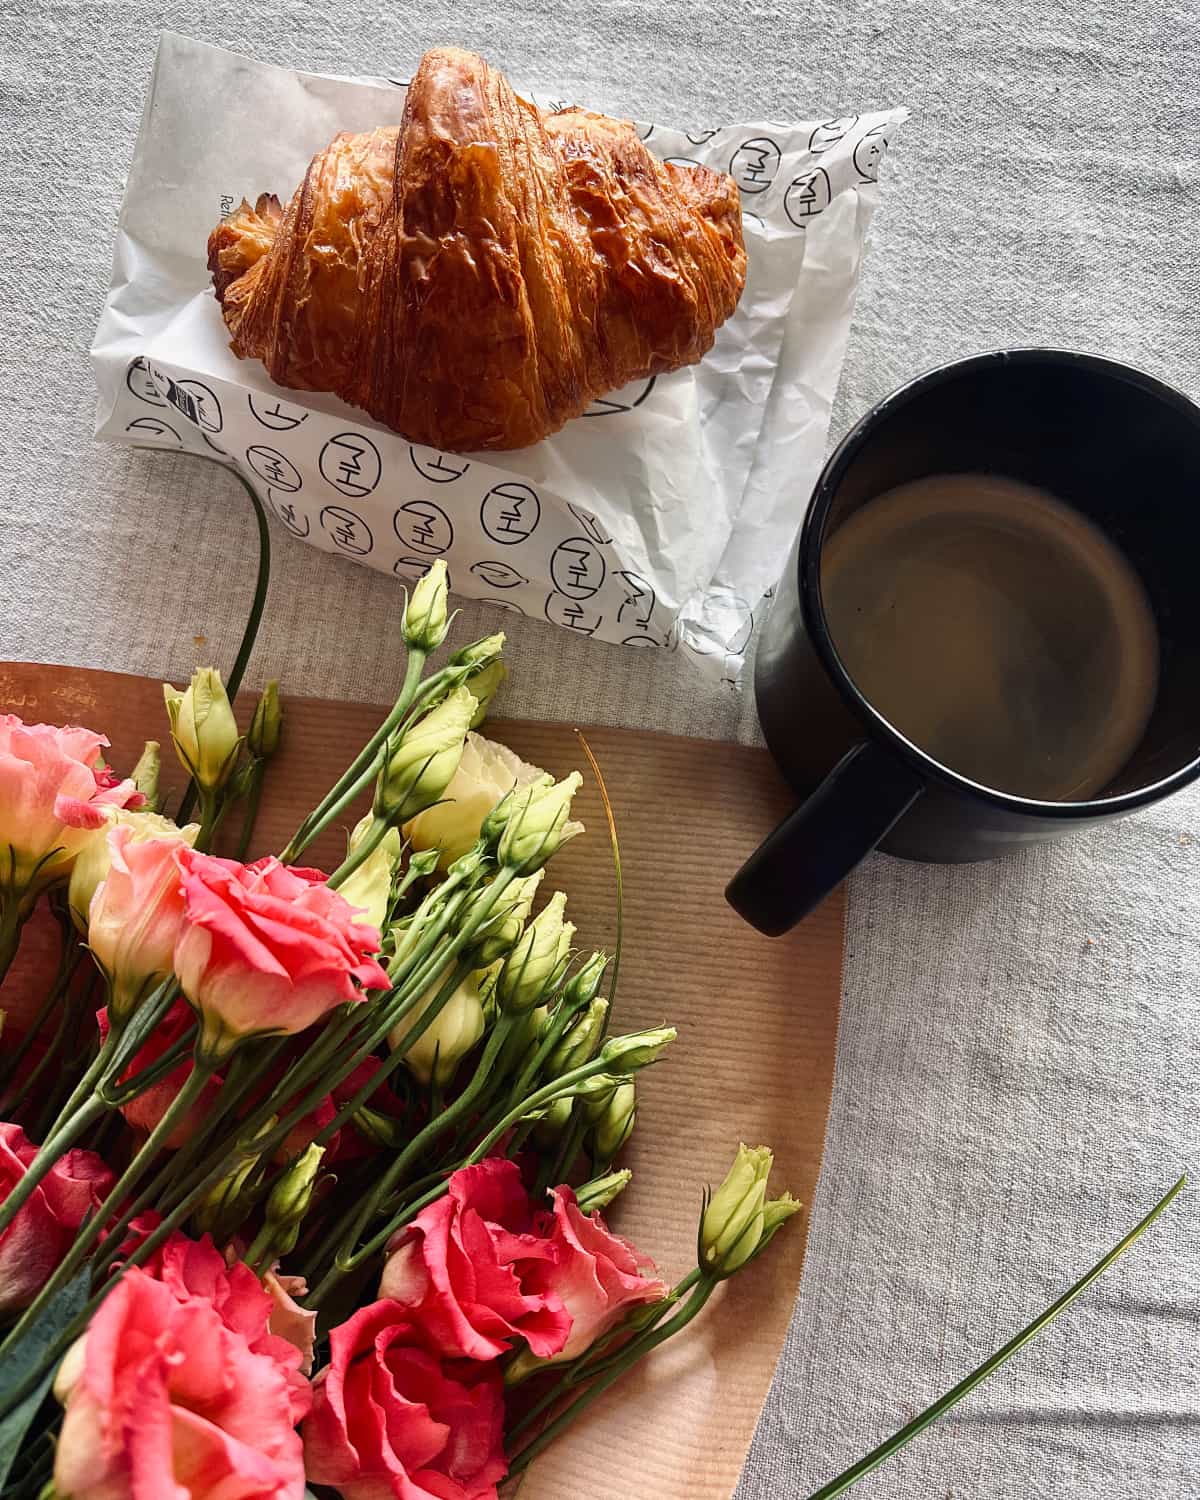 Croissants coffee and table